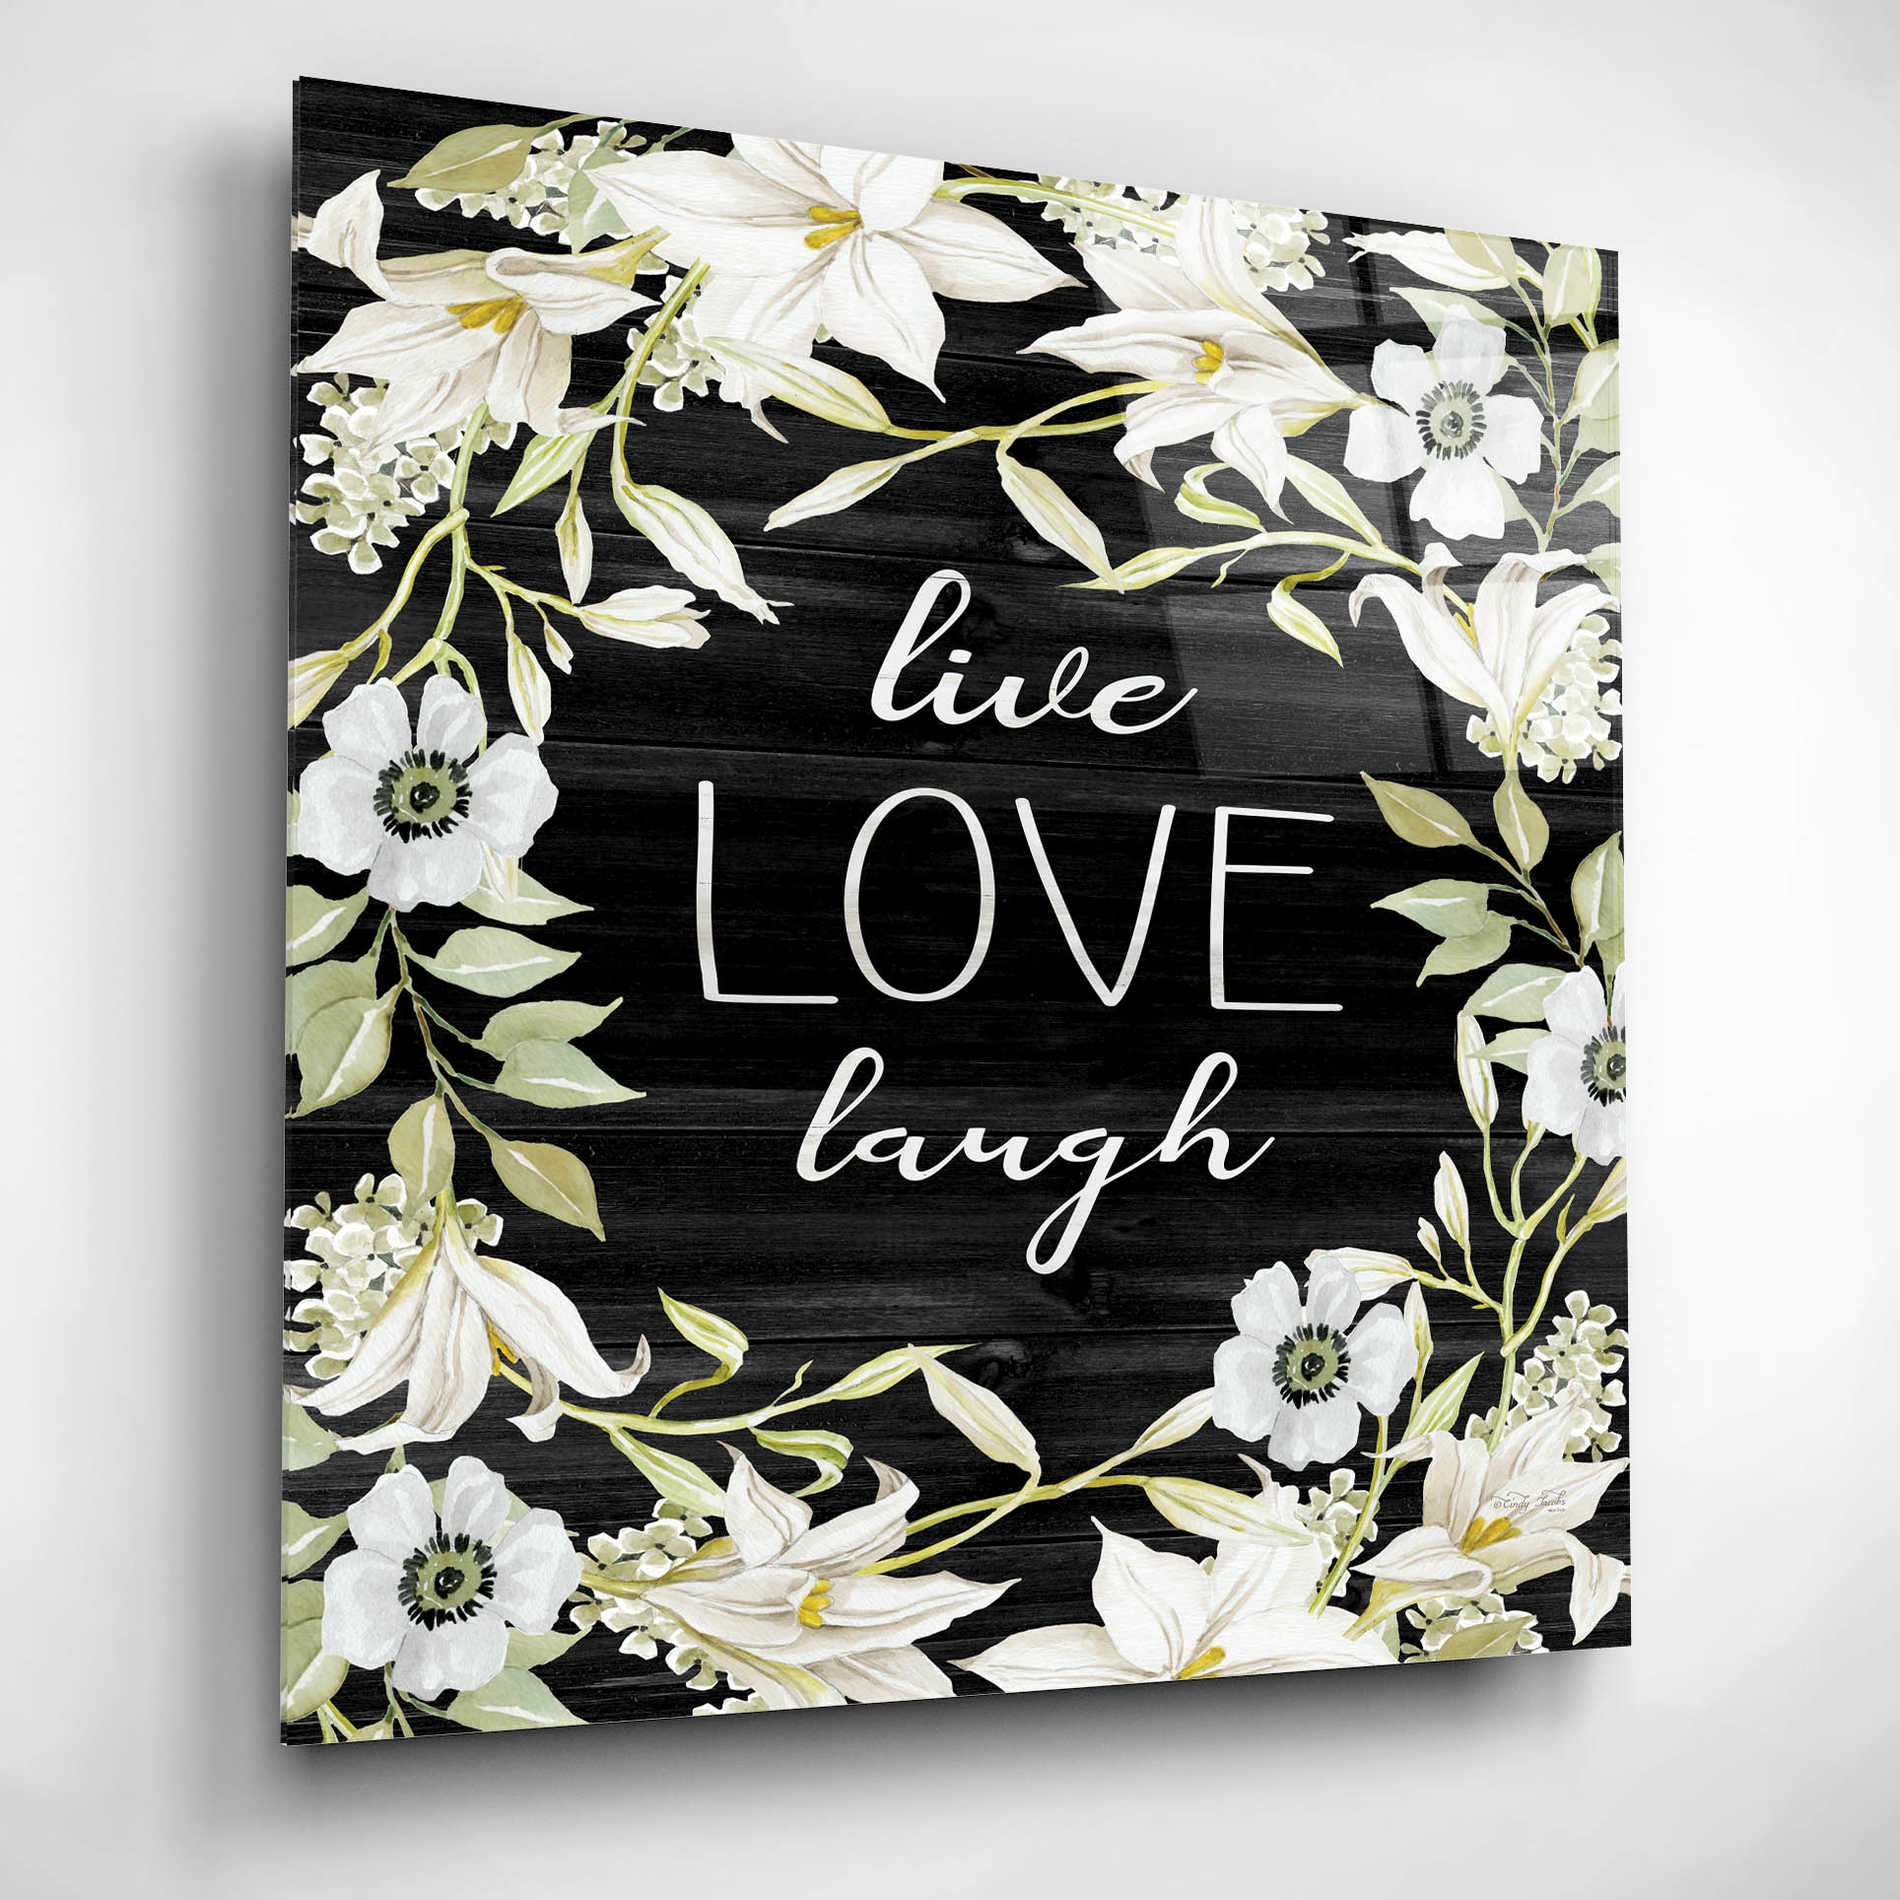 Epic Art 'Live, Love, Laugh' by Cindy Jacobs, Acrylic Glass Wall Art,12x12